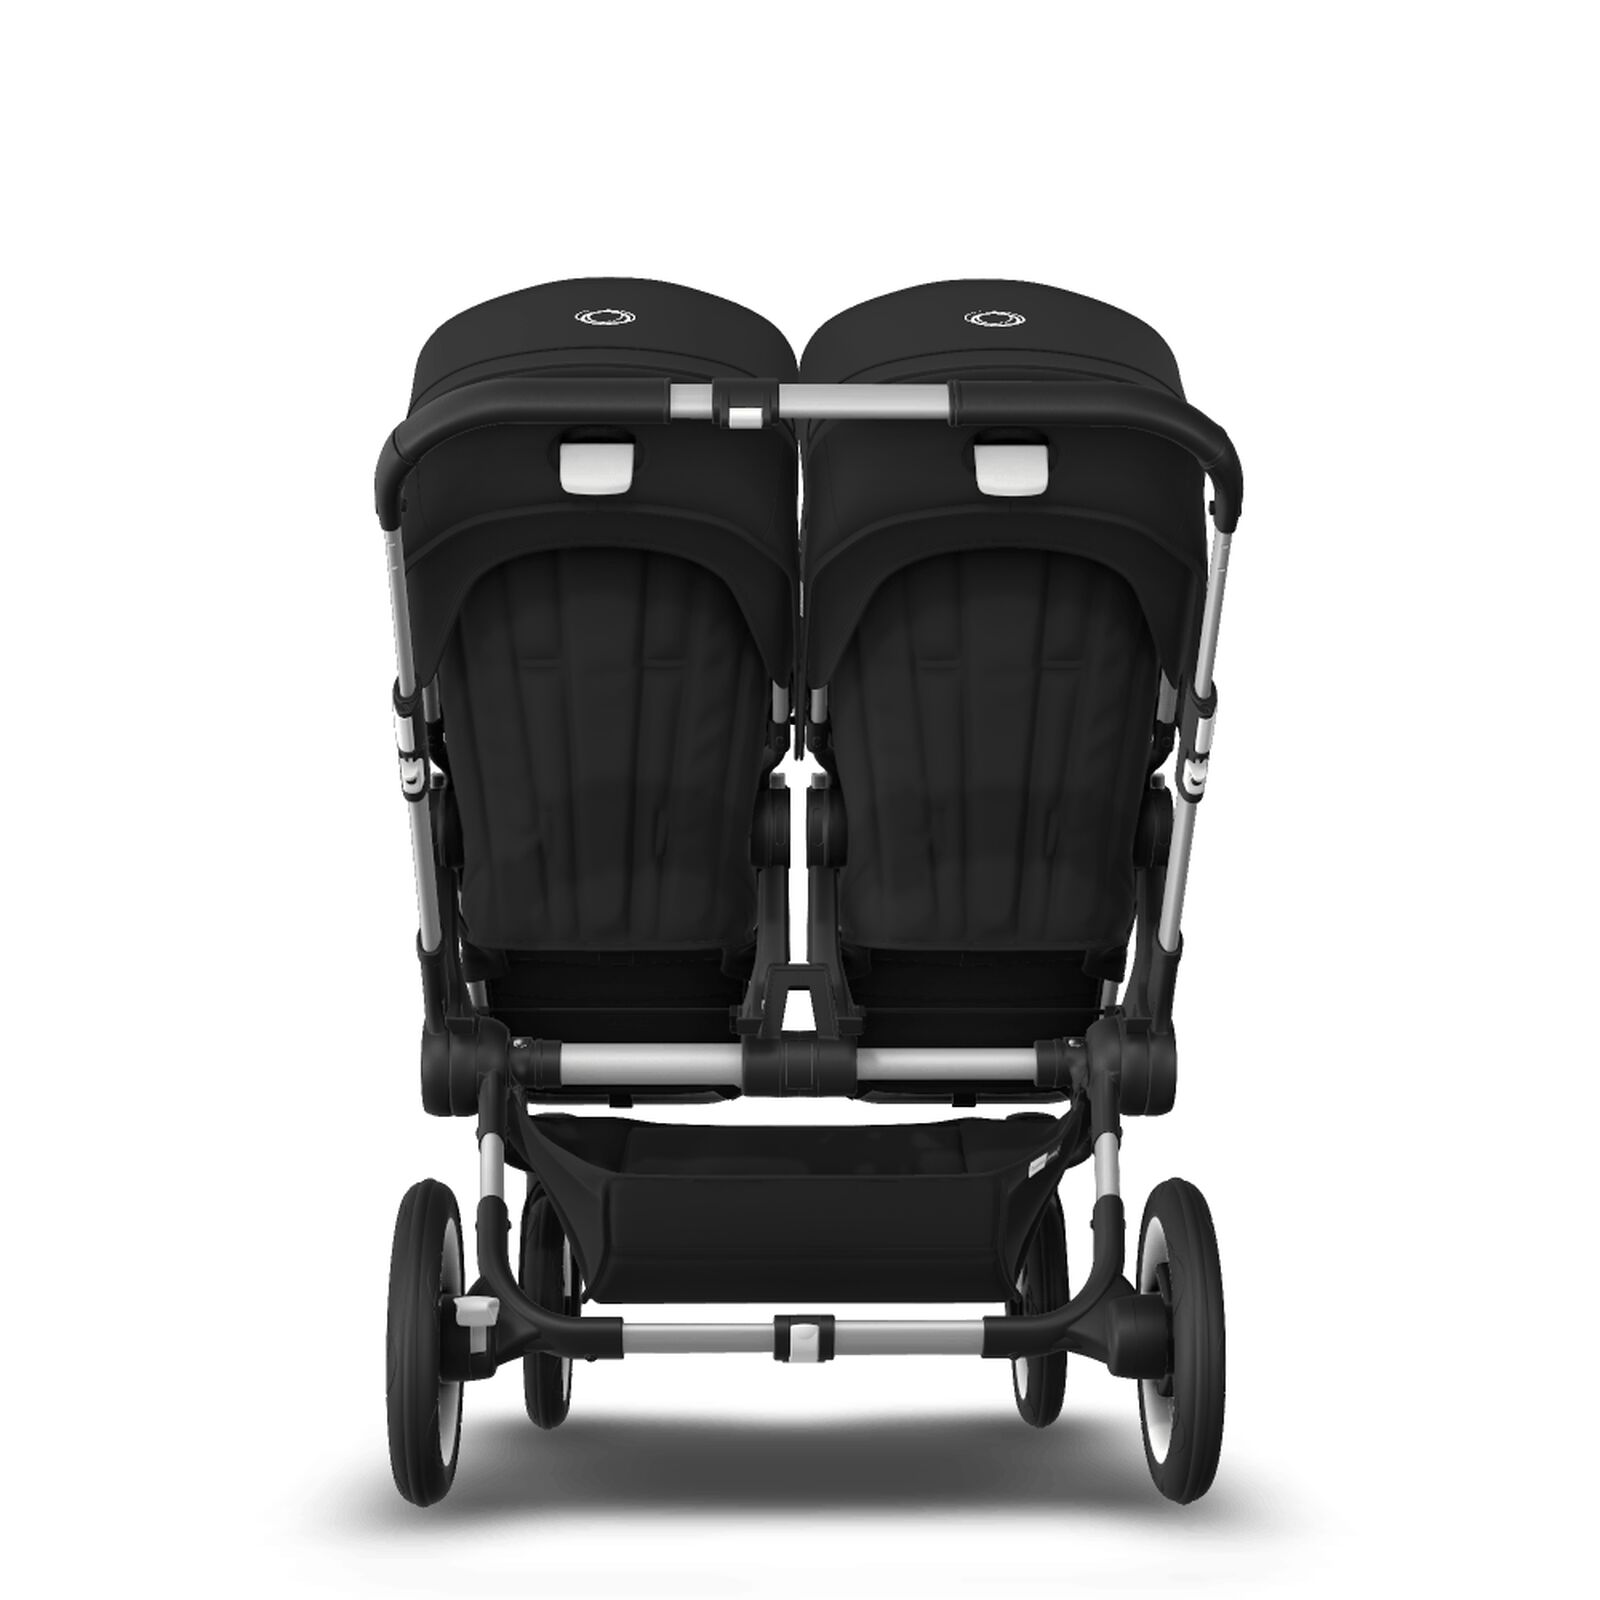 Bugaboo Donkey 3 Twin travel system - View 14